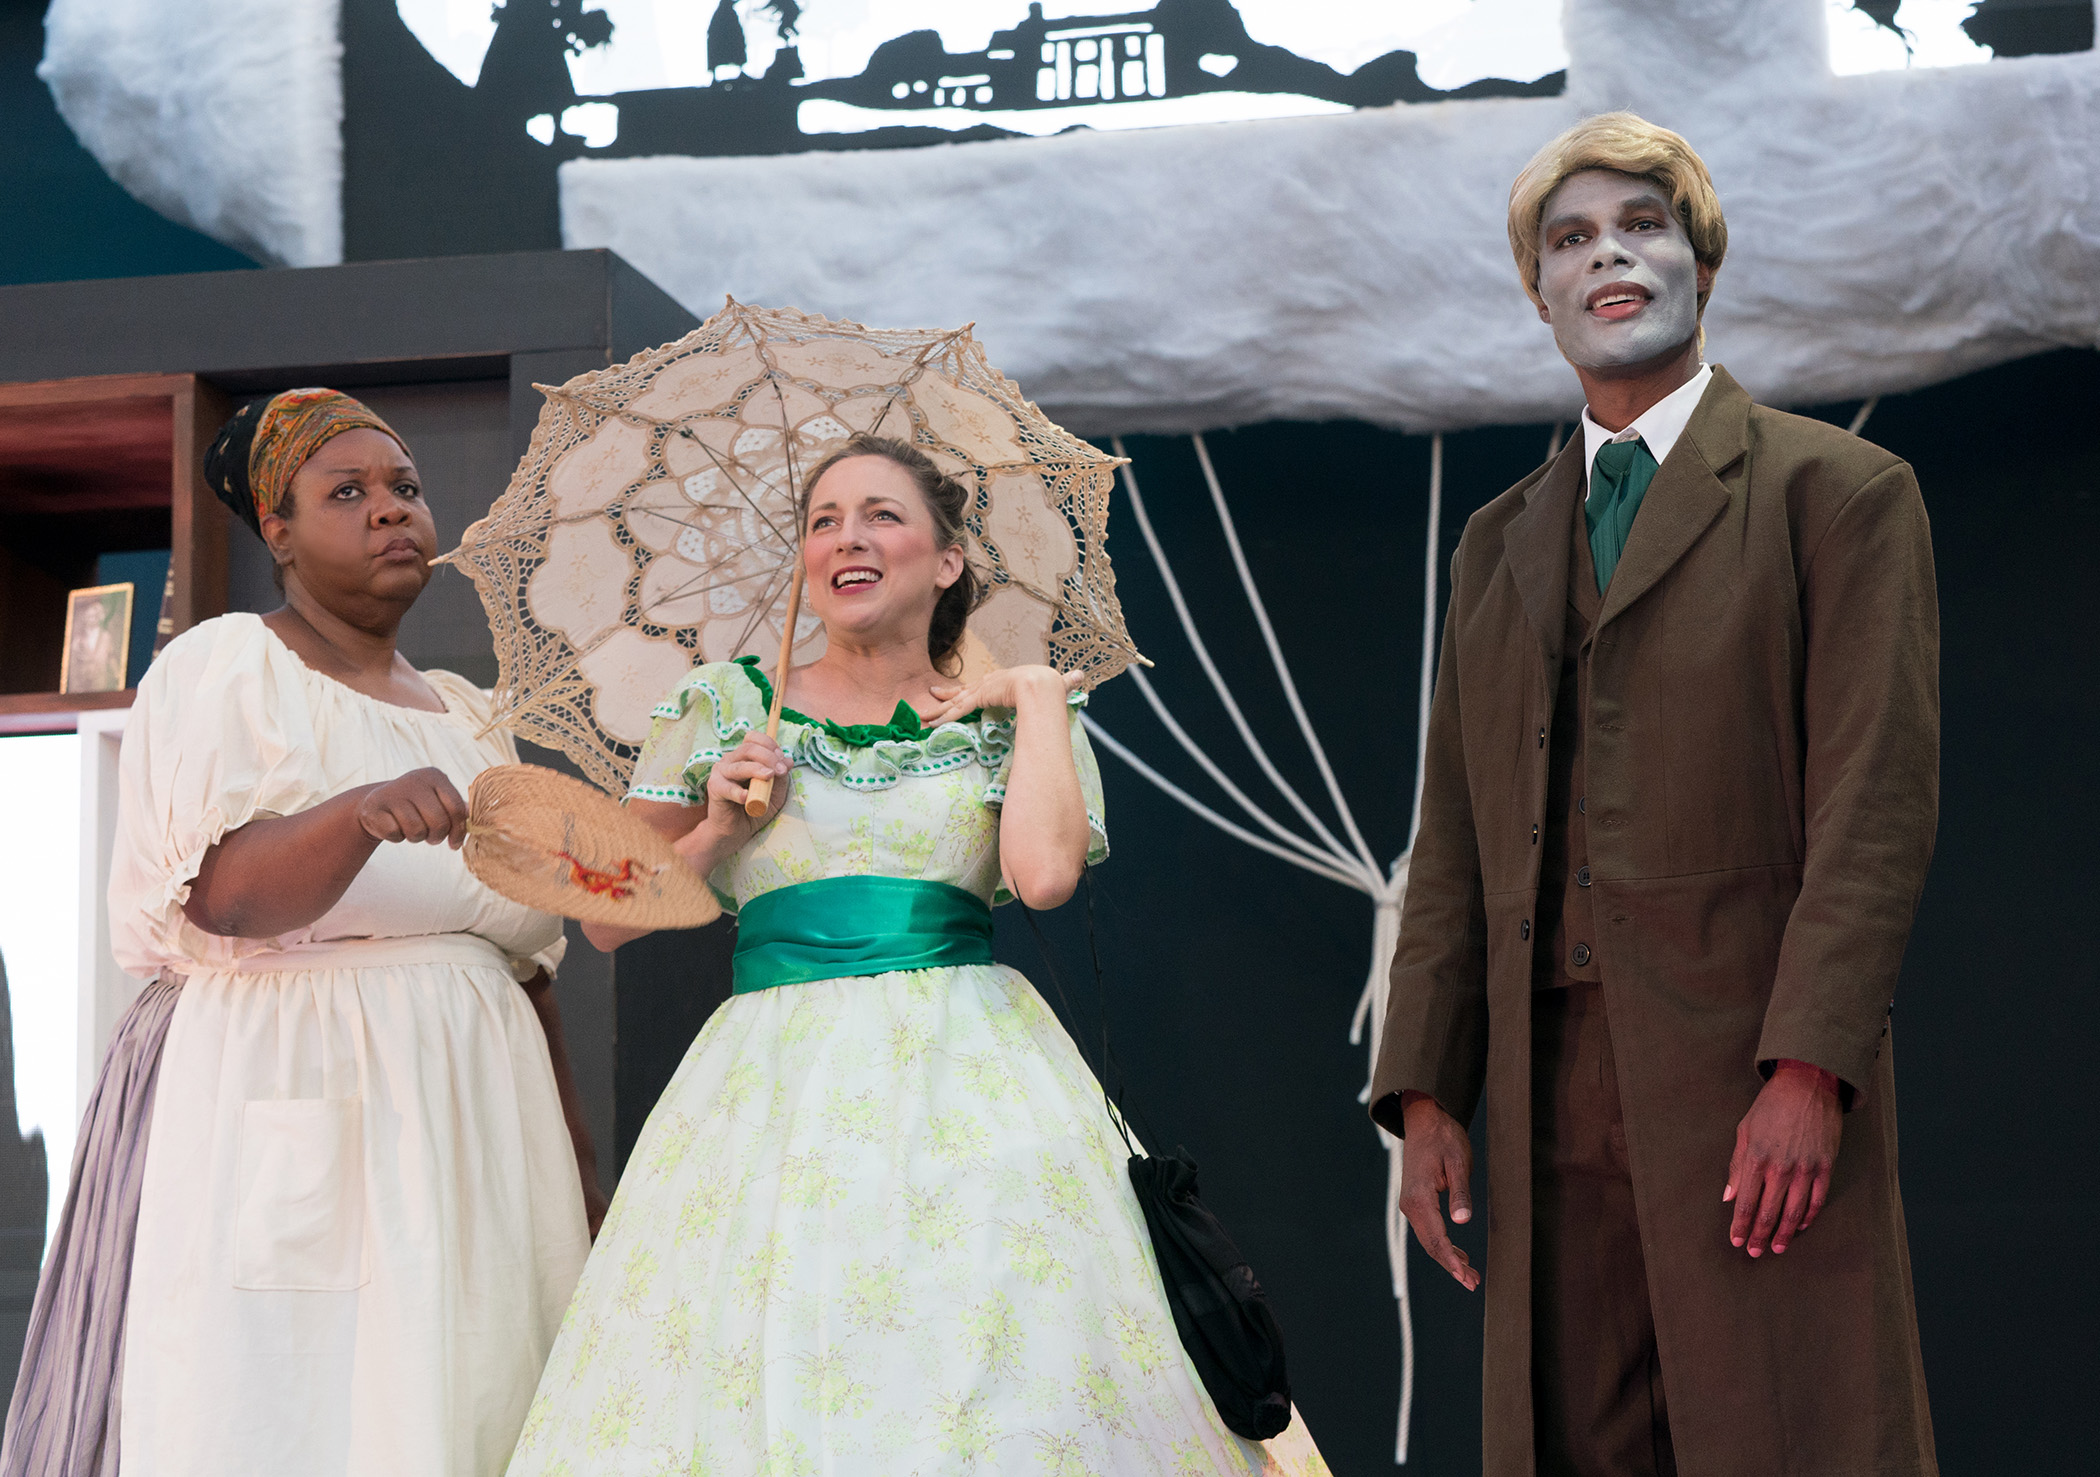 ‘An Octoroon’: Intellectual rollercoaster ride of a play about race in America